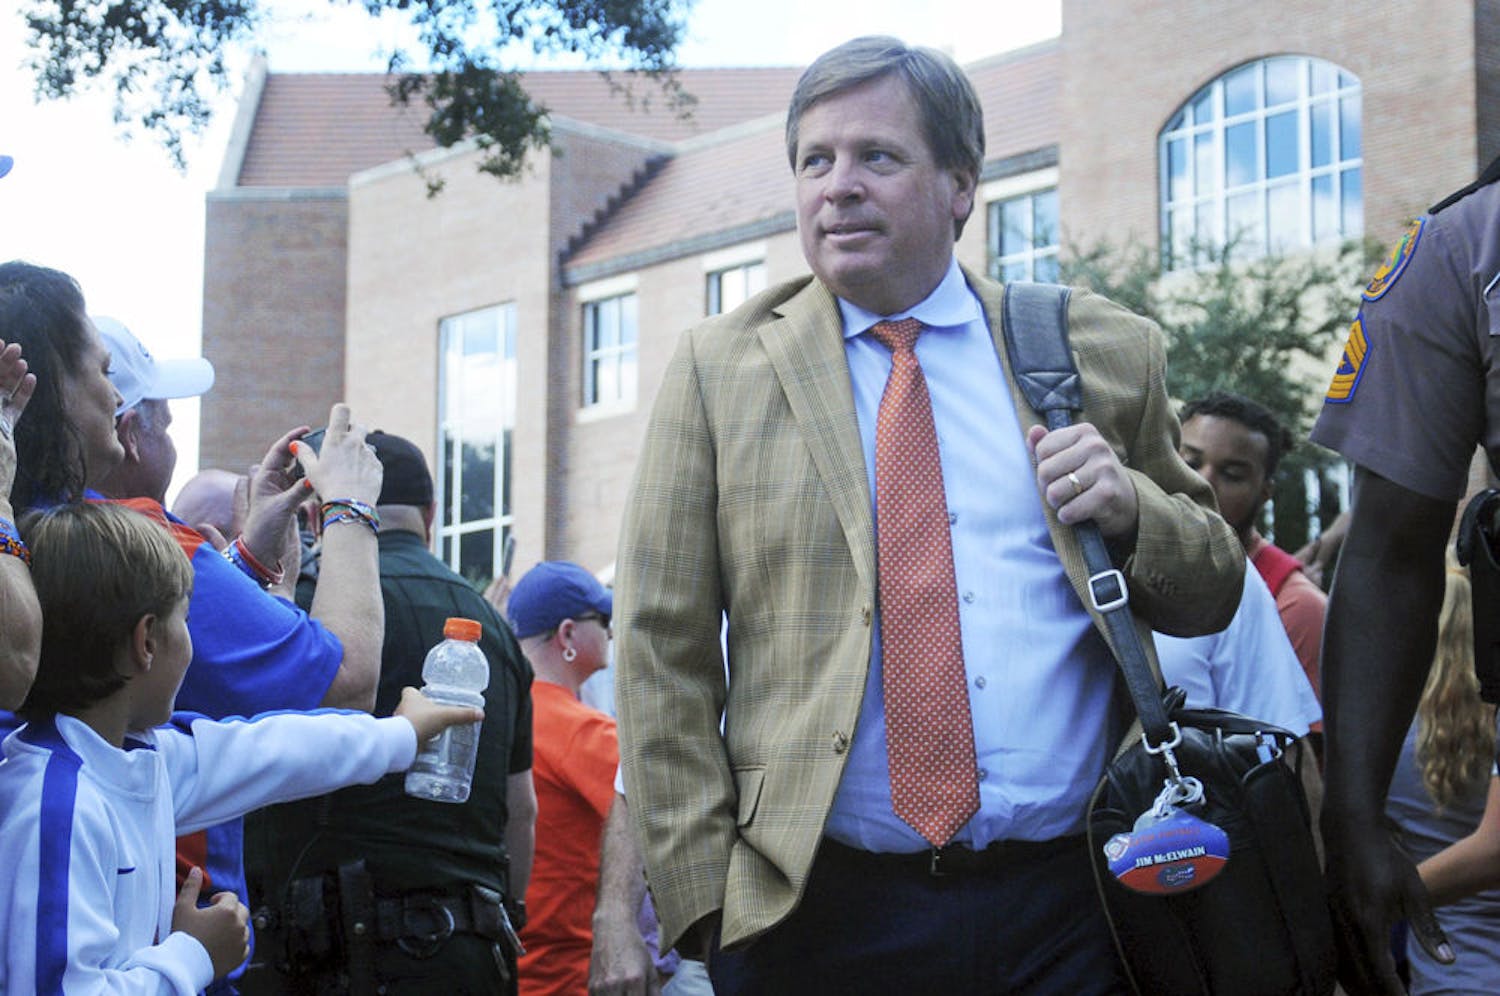 UF coach Jim McElwain walks to the stadium before Florida's 38-10 win against Ole Miss on Oct. 3, 2015, at Ben Hill Griffin Stadium.